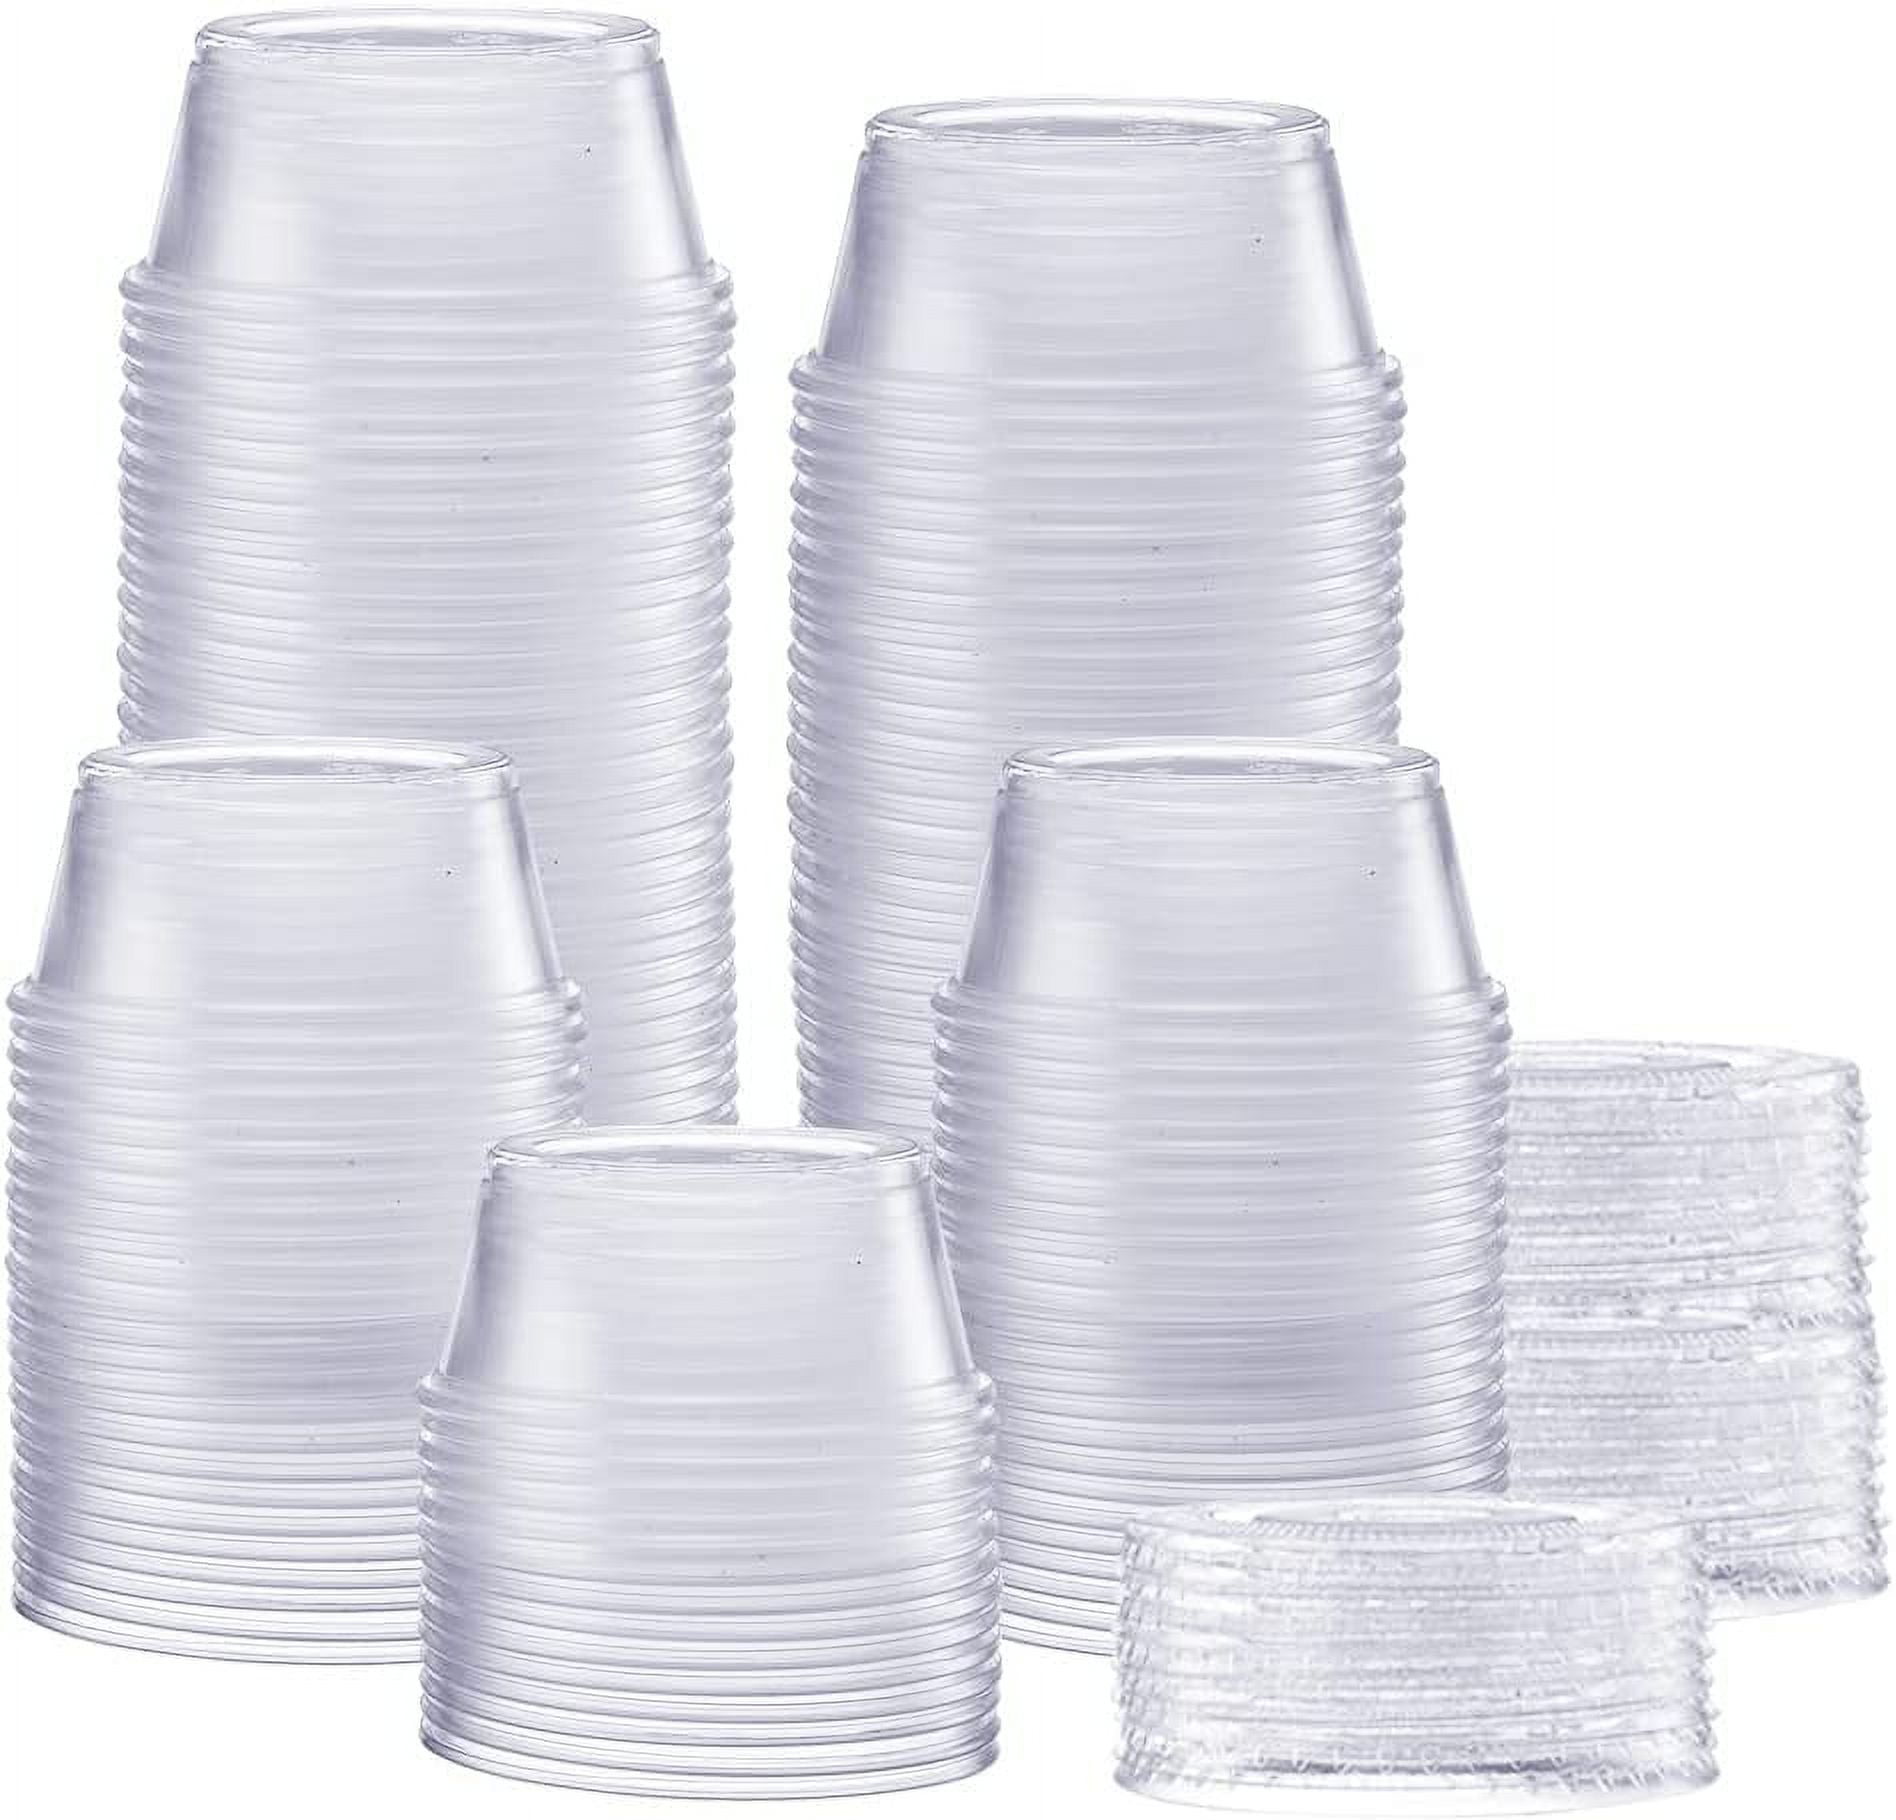 8 oz Disposable Soup Cups With Lids Plastic 240 Set – Pony Packaging